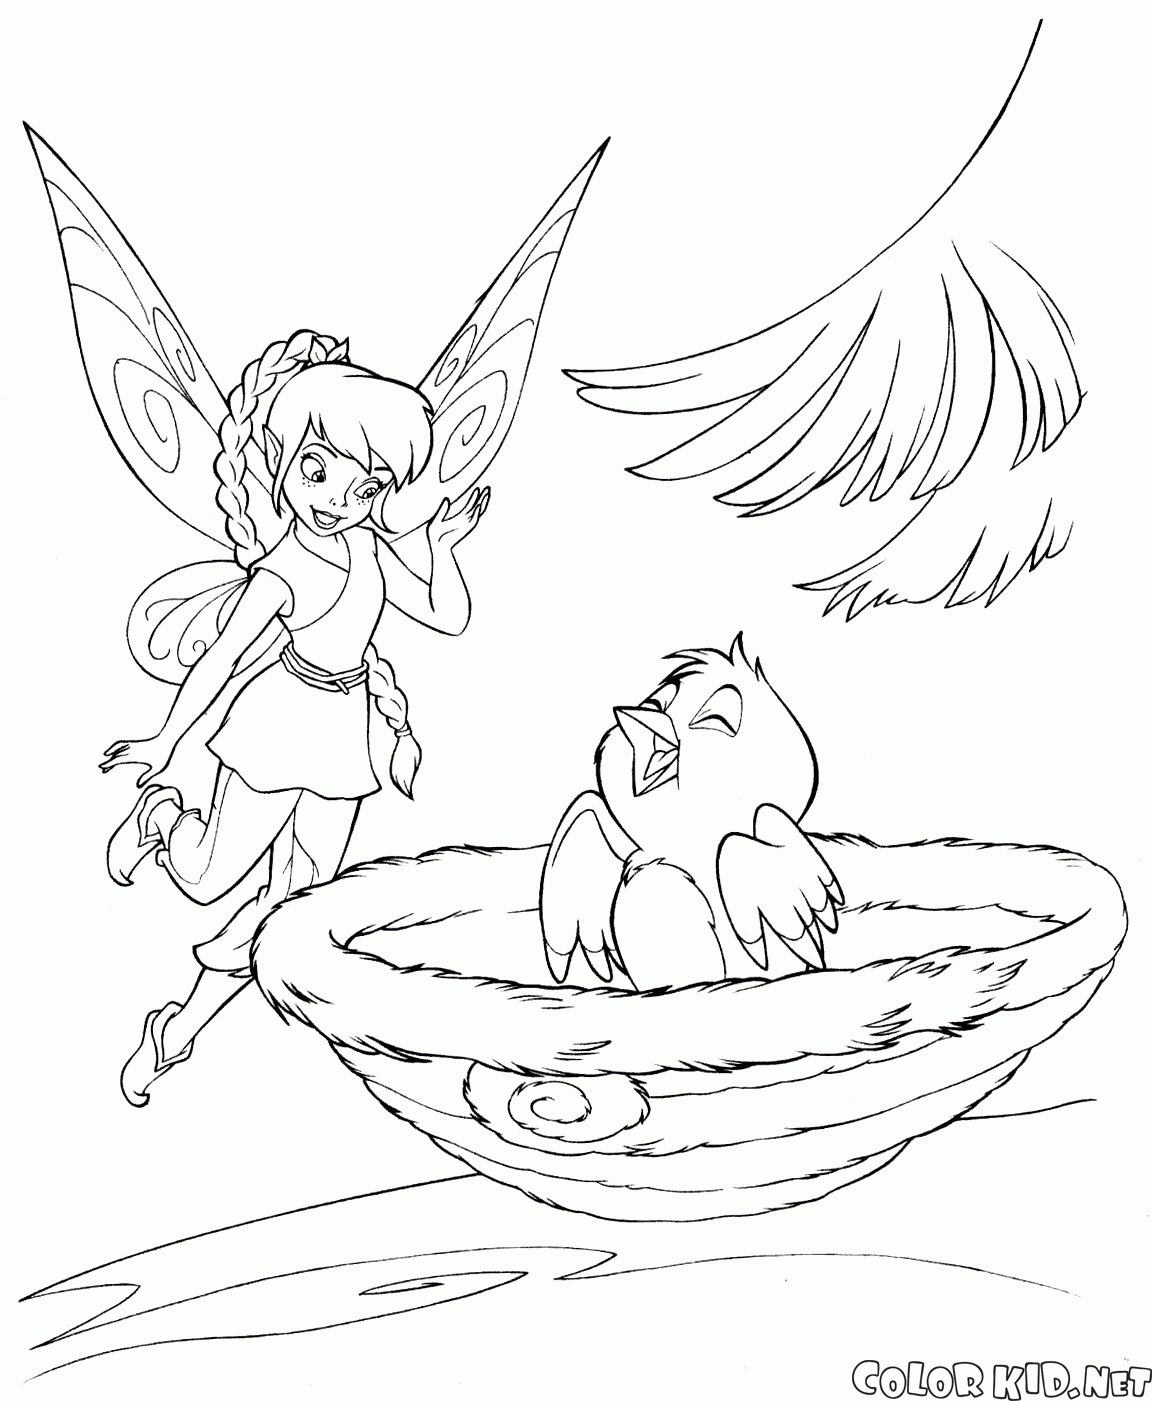 Fairy and chick